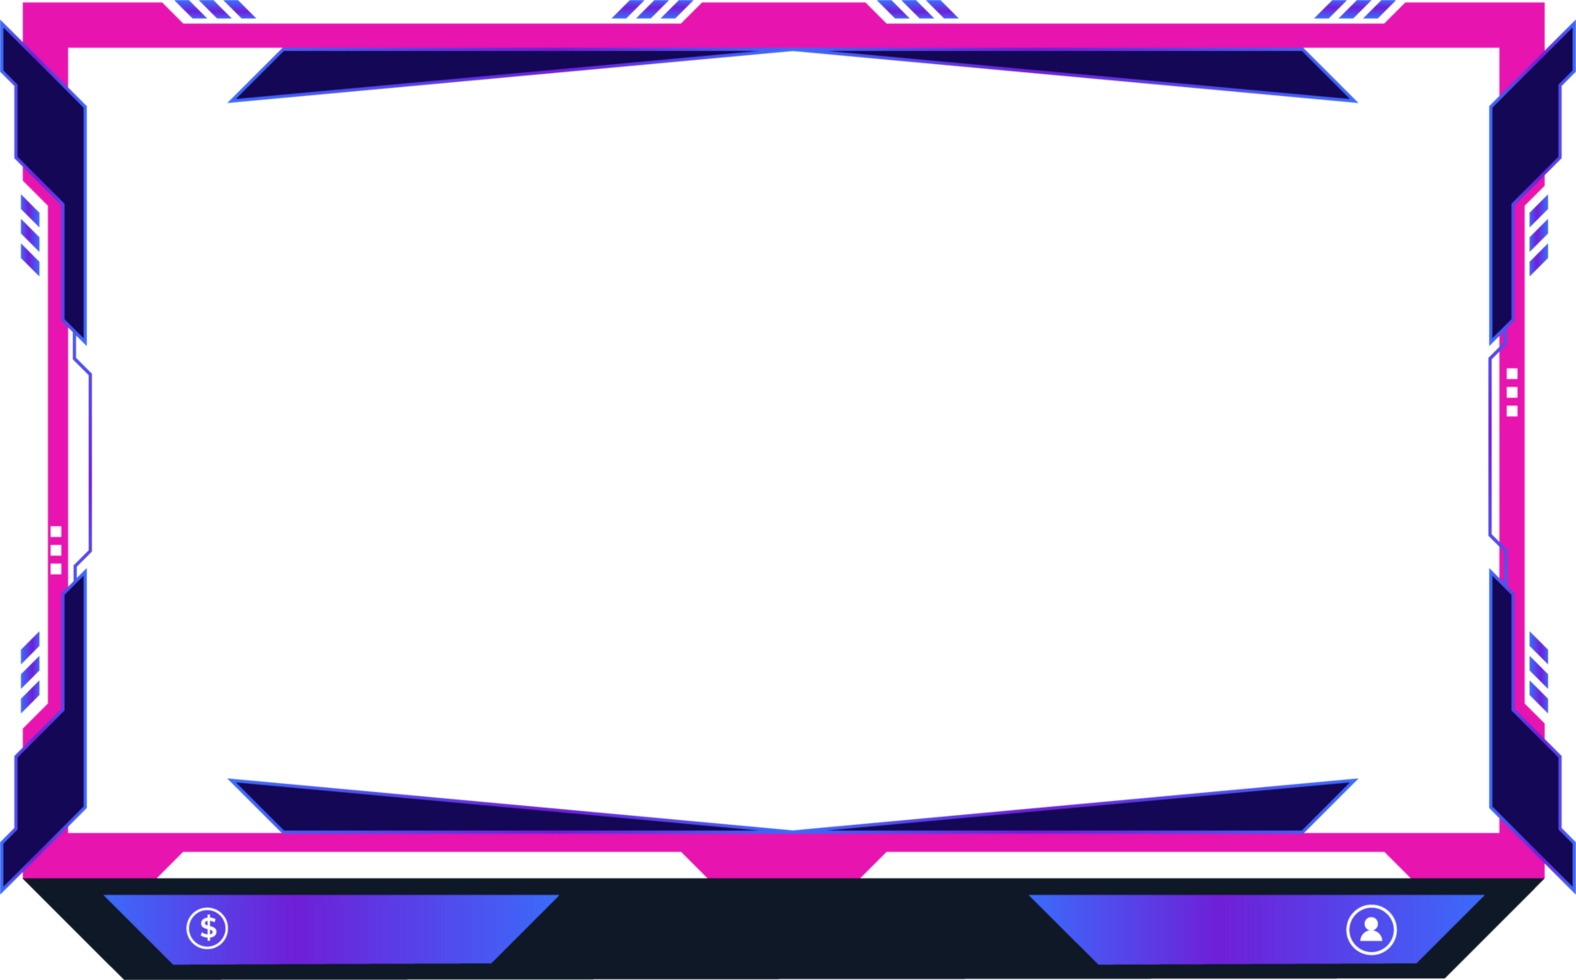 Live streaming overlay png with girly pink color borders. A futuristic broadcast screen panel for online gamers with buttons. Online gaming screen border design for girl gamers.